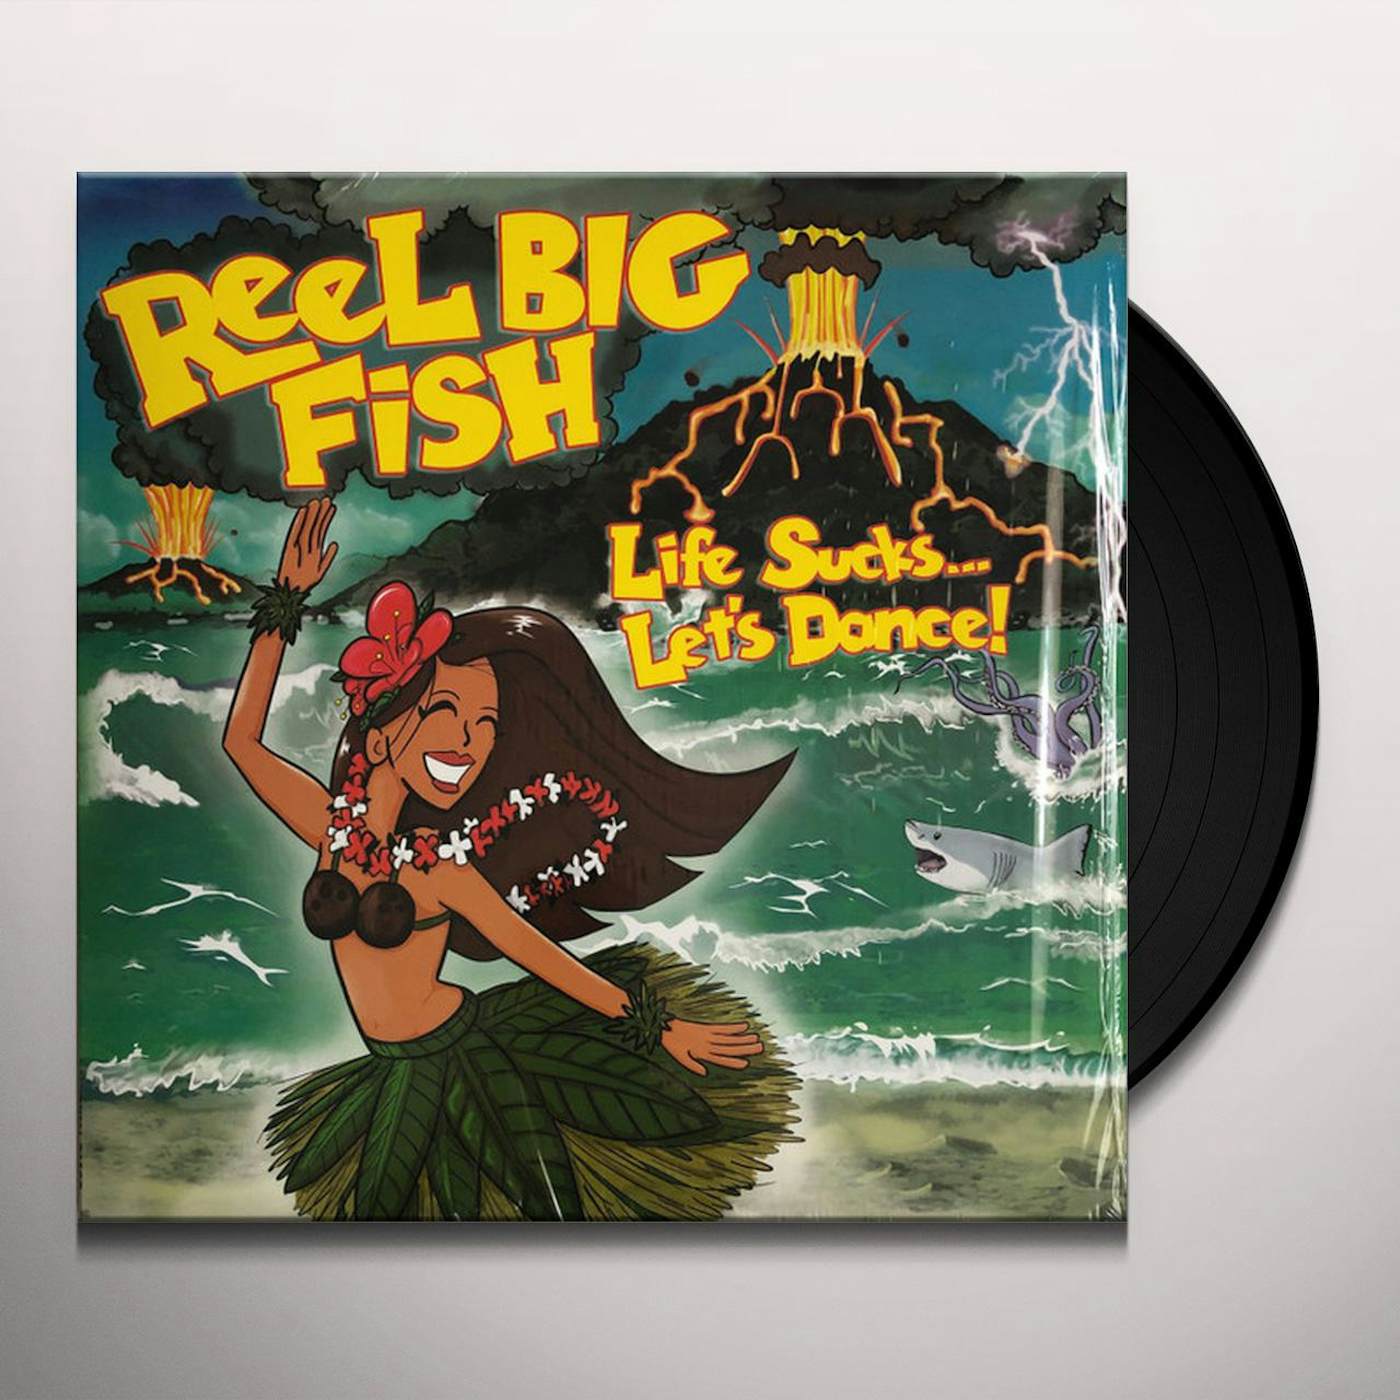 reel big fish shirt products for sale